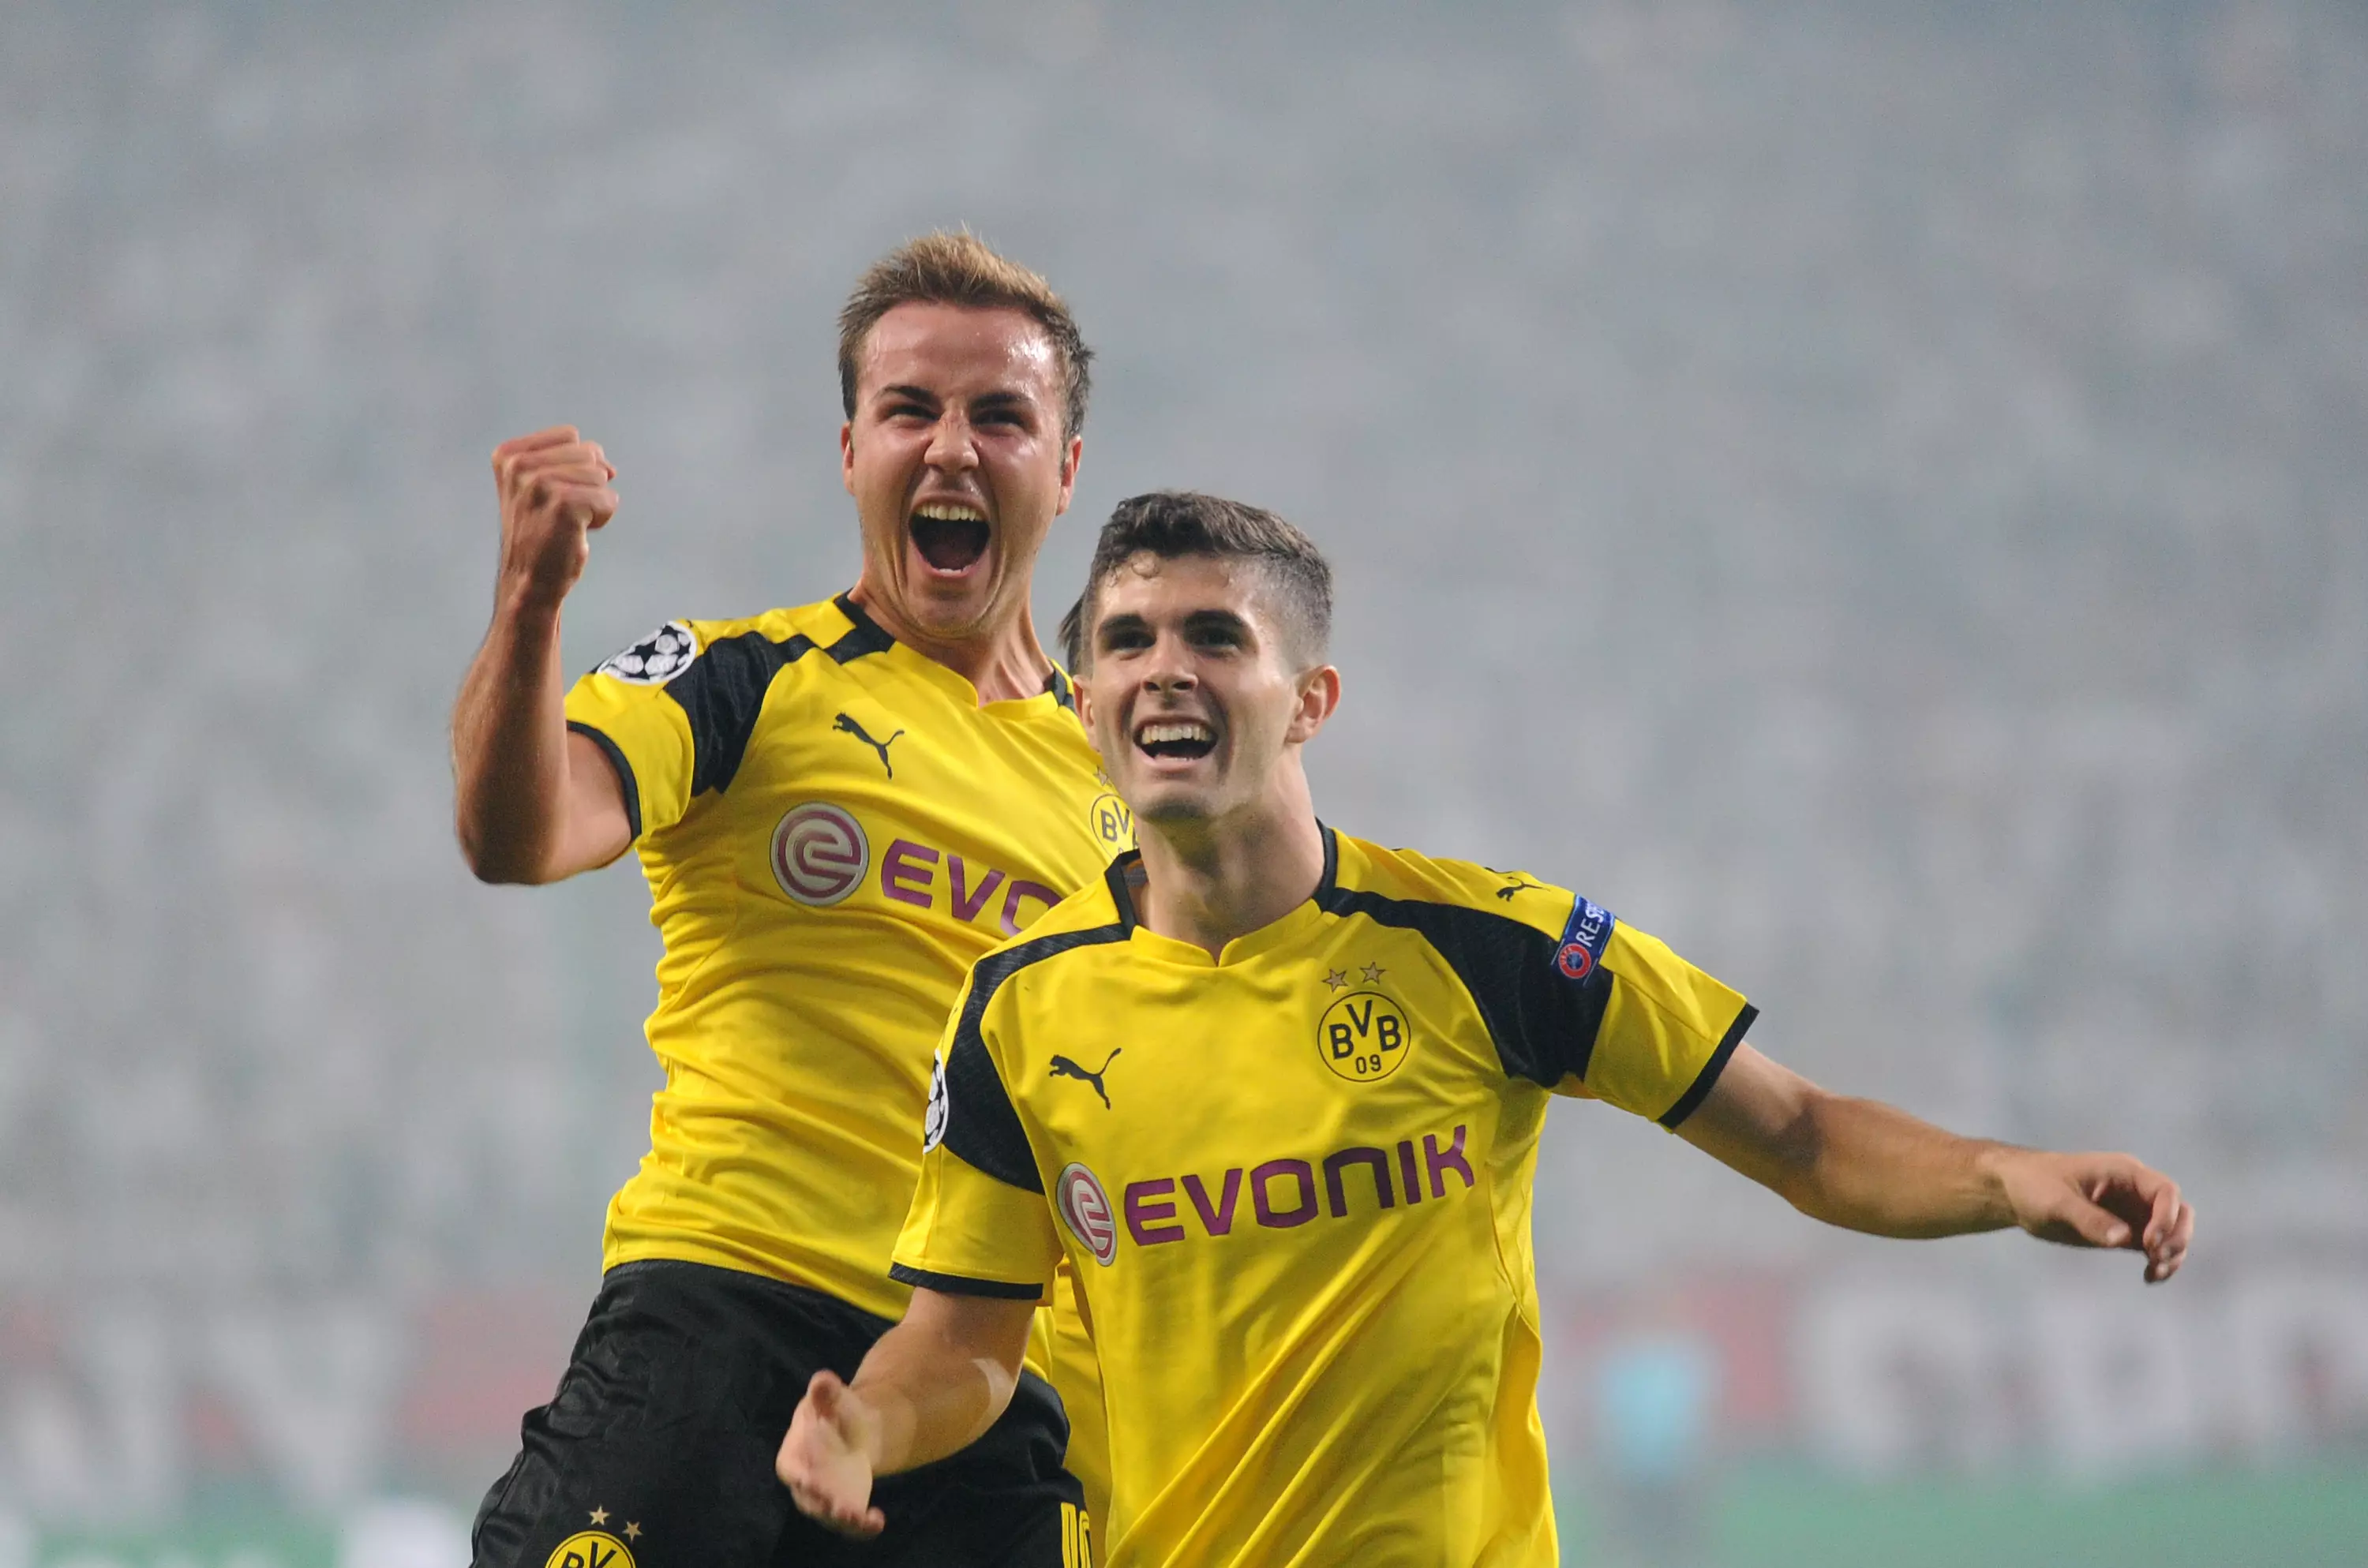 Pulisic didn't have enough reasons to celebrate for Liverpool to make a move. Image: PA Images